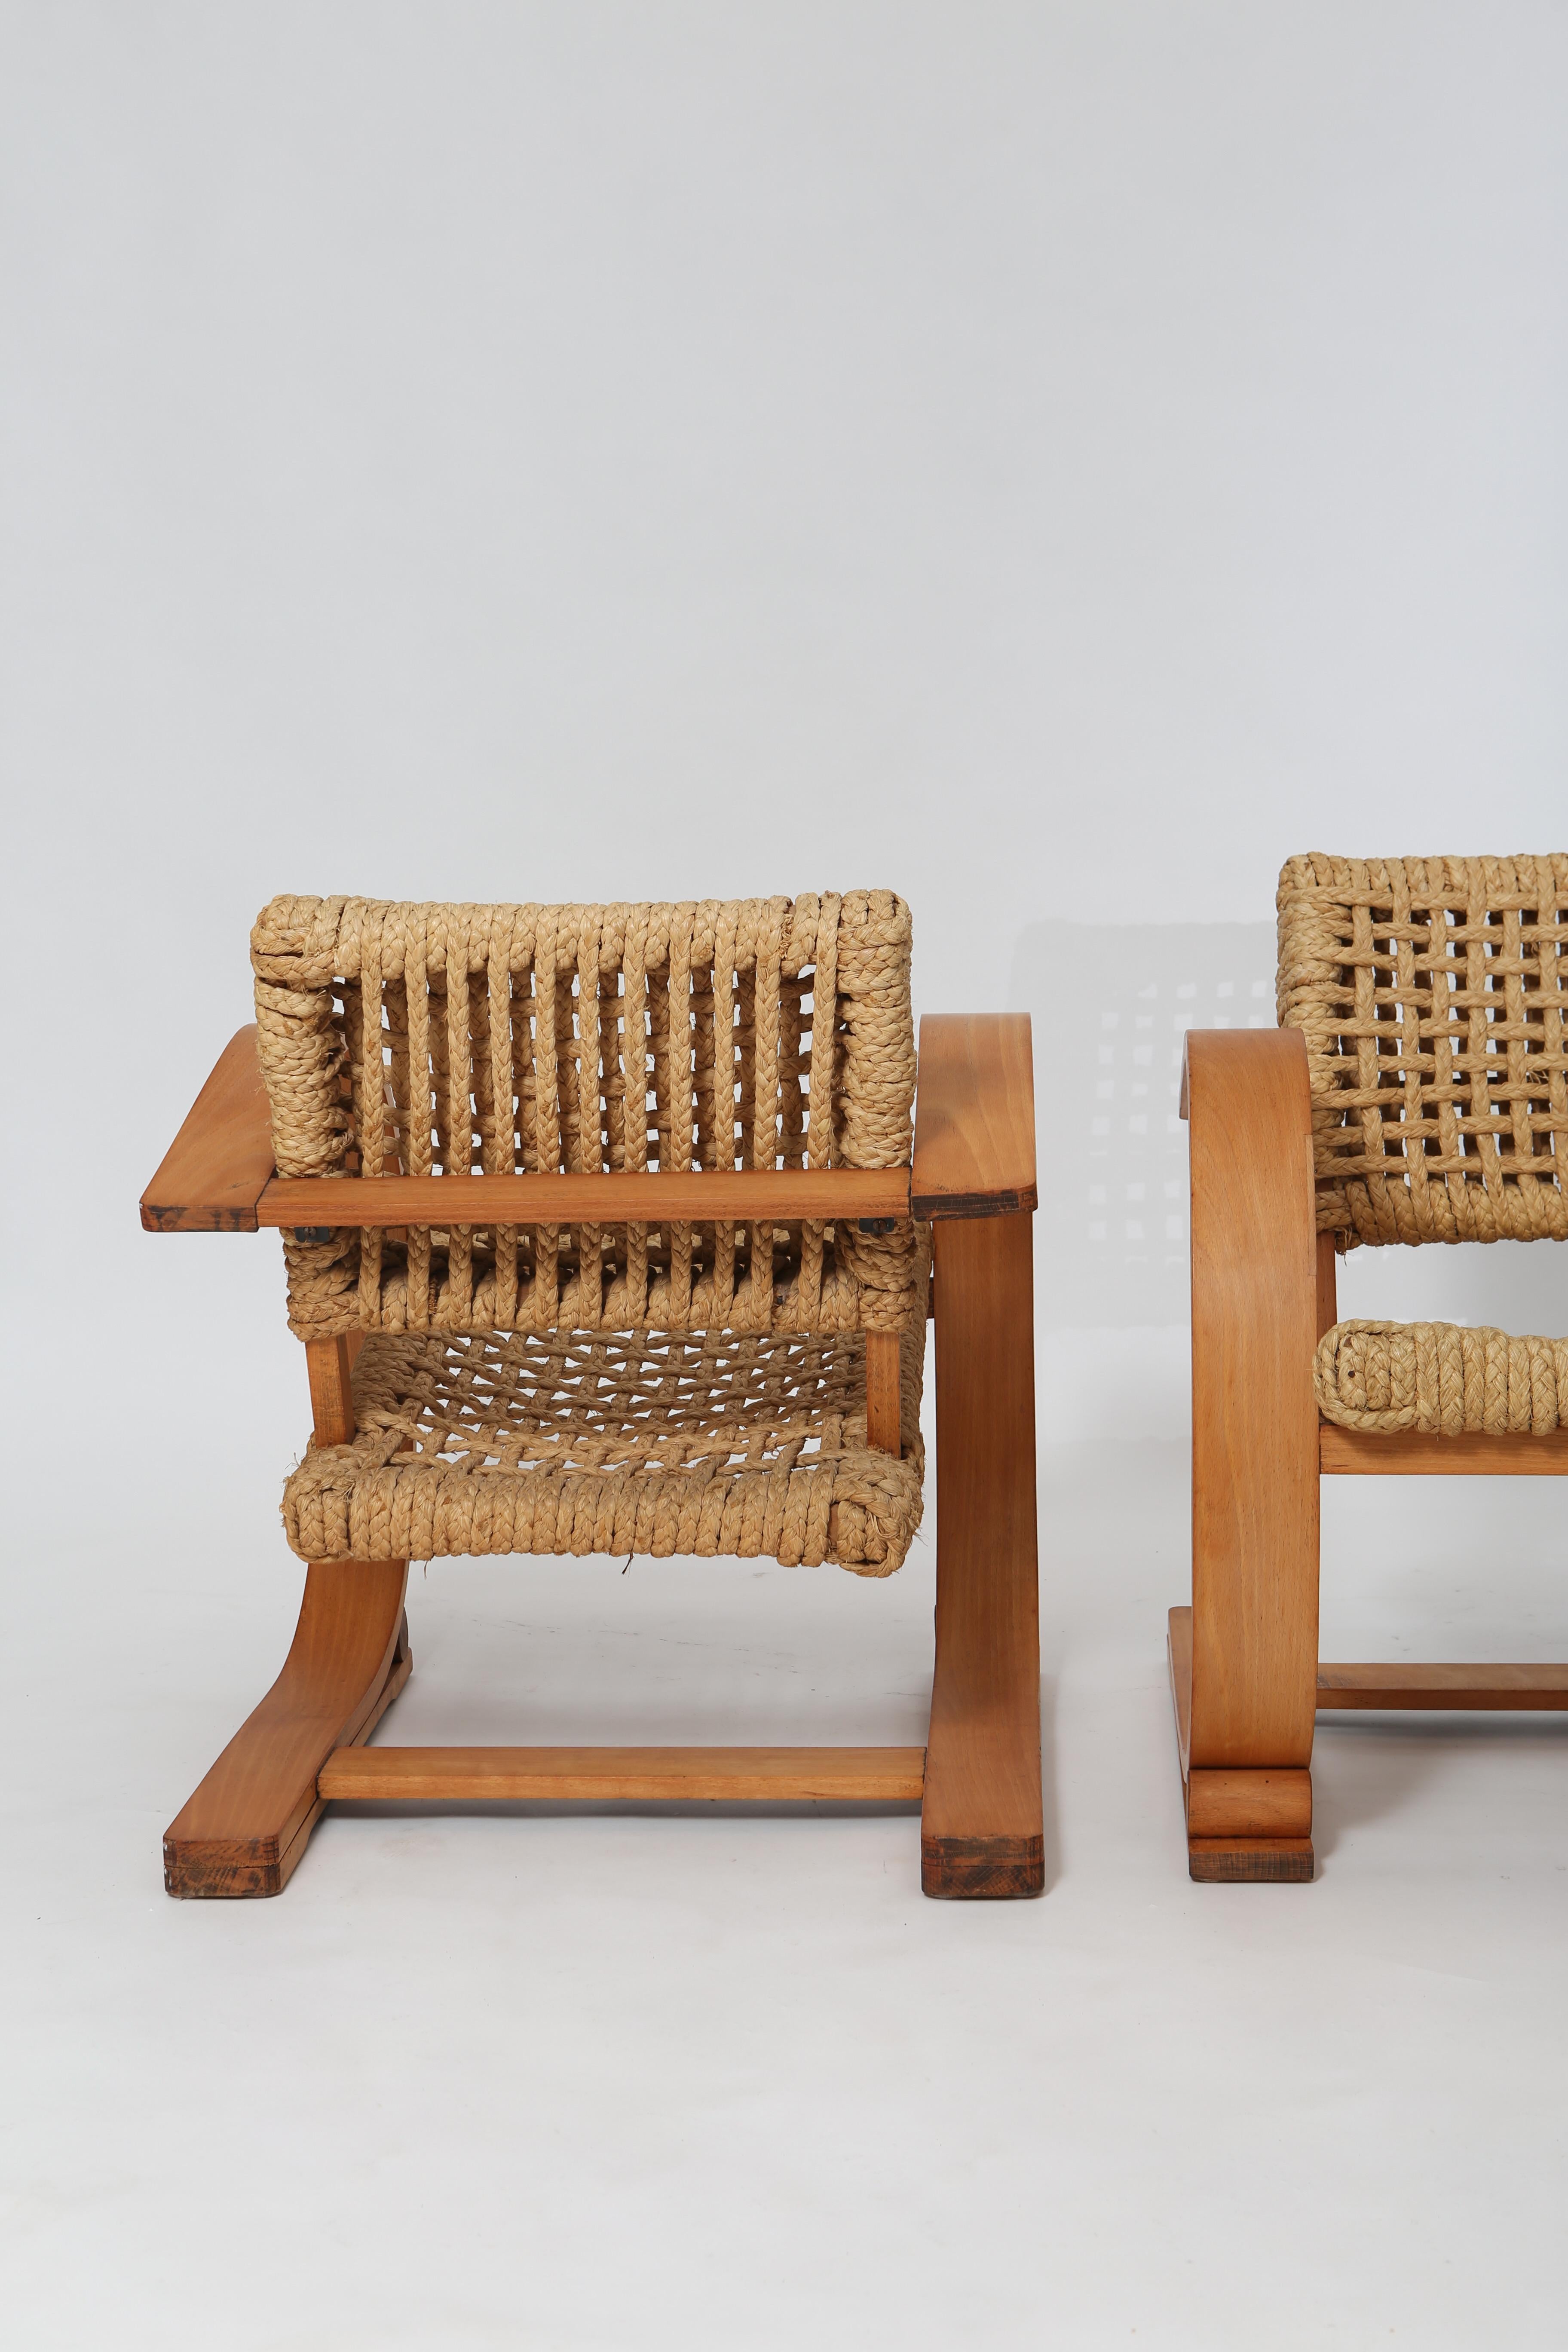 French Midcentury Rope Cantilever Chairs by Audoux & Minet In Good Condition For Sale In Portland, OR